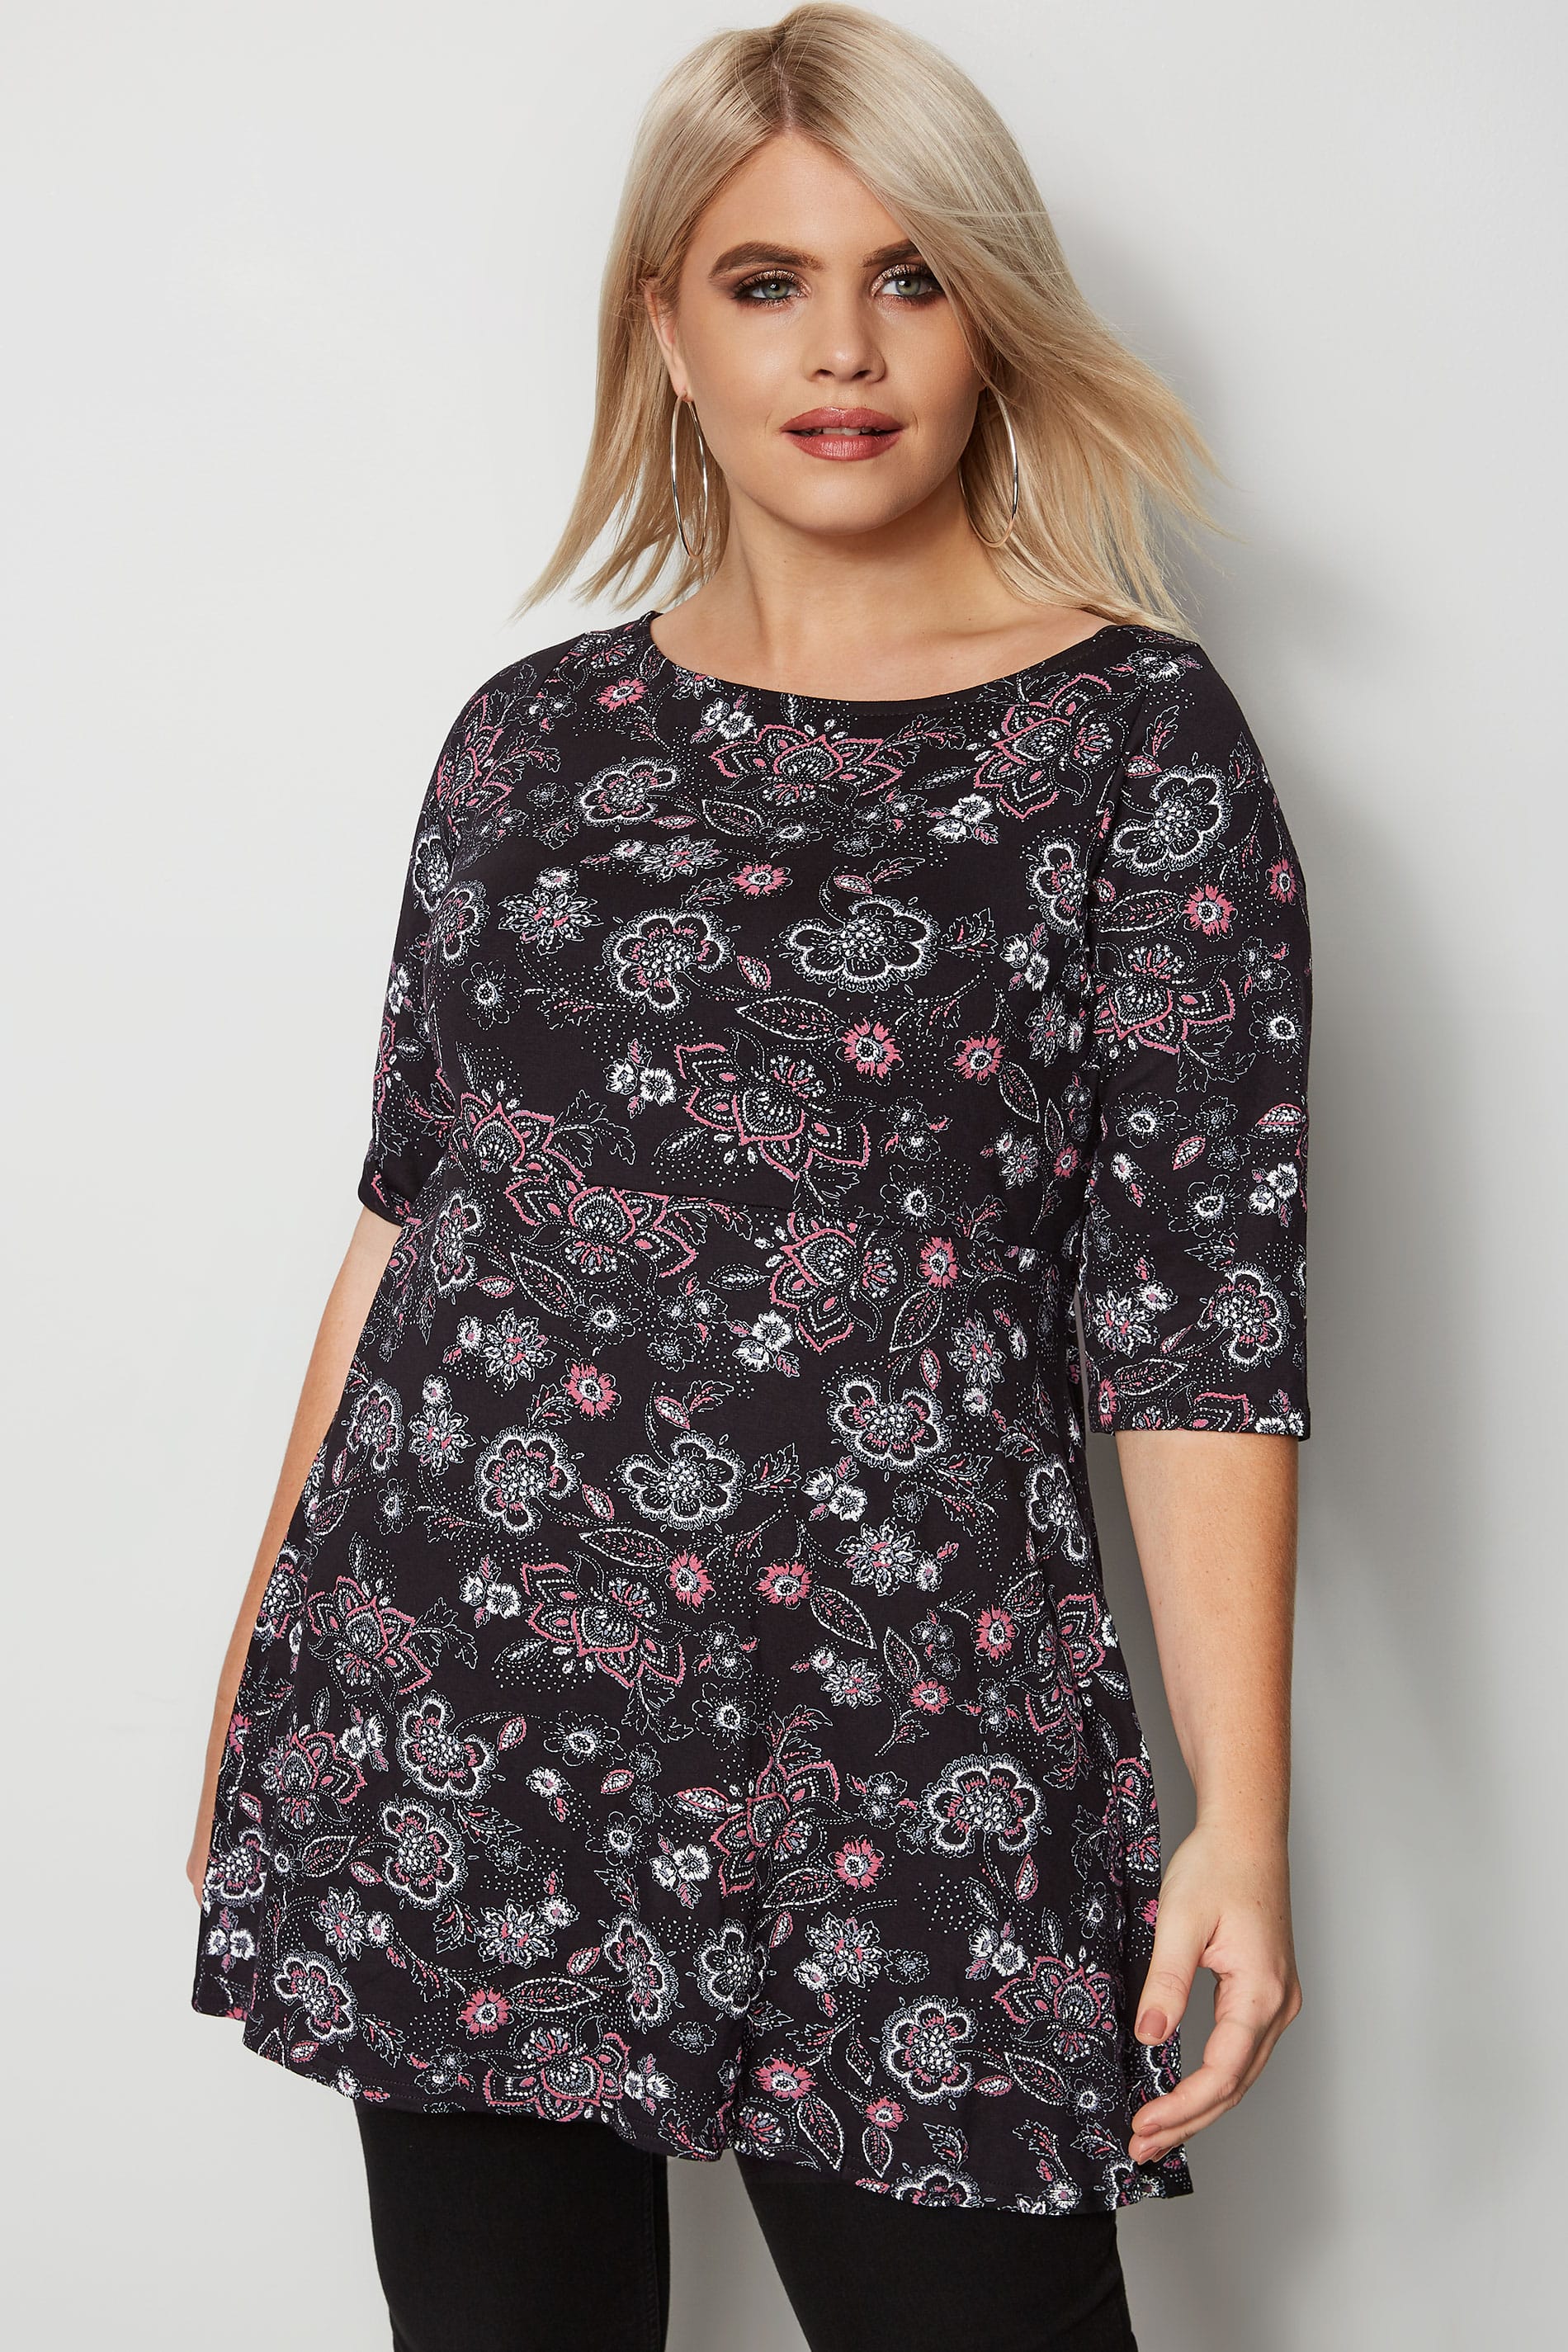 Black & Pink Floral Peplum Top, Plus size 16 to 36